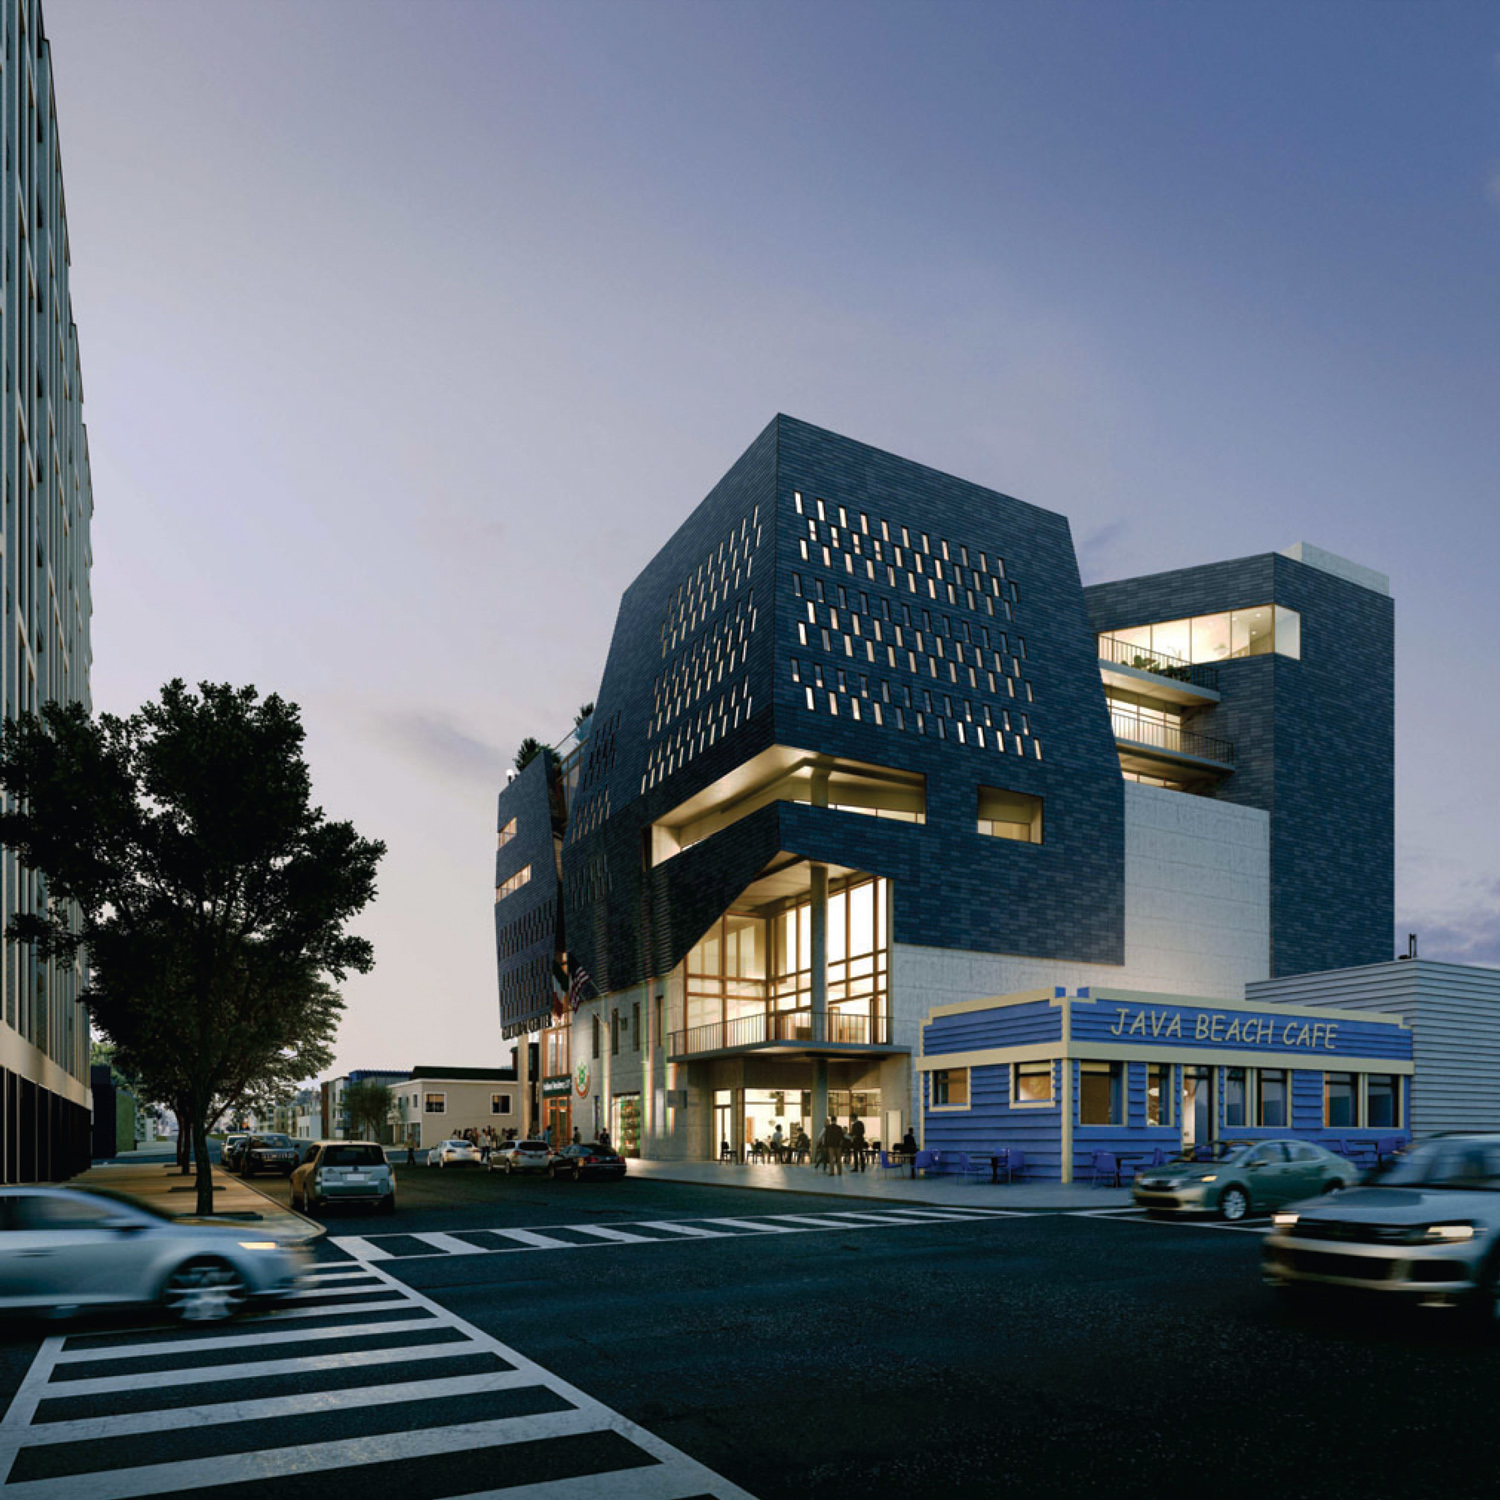 United Irish Cultural Center seen from 45th Avenue and Sloat Boulevard, rendering by Studio BANAA